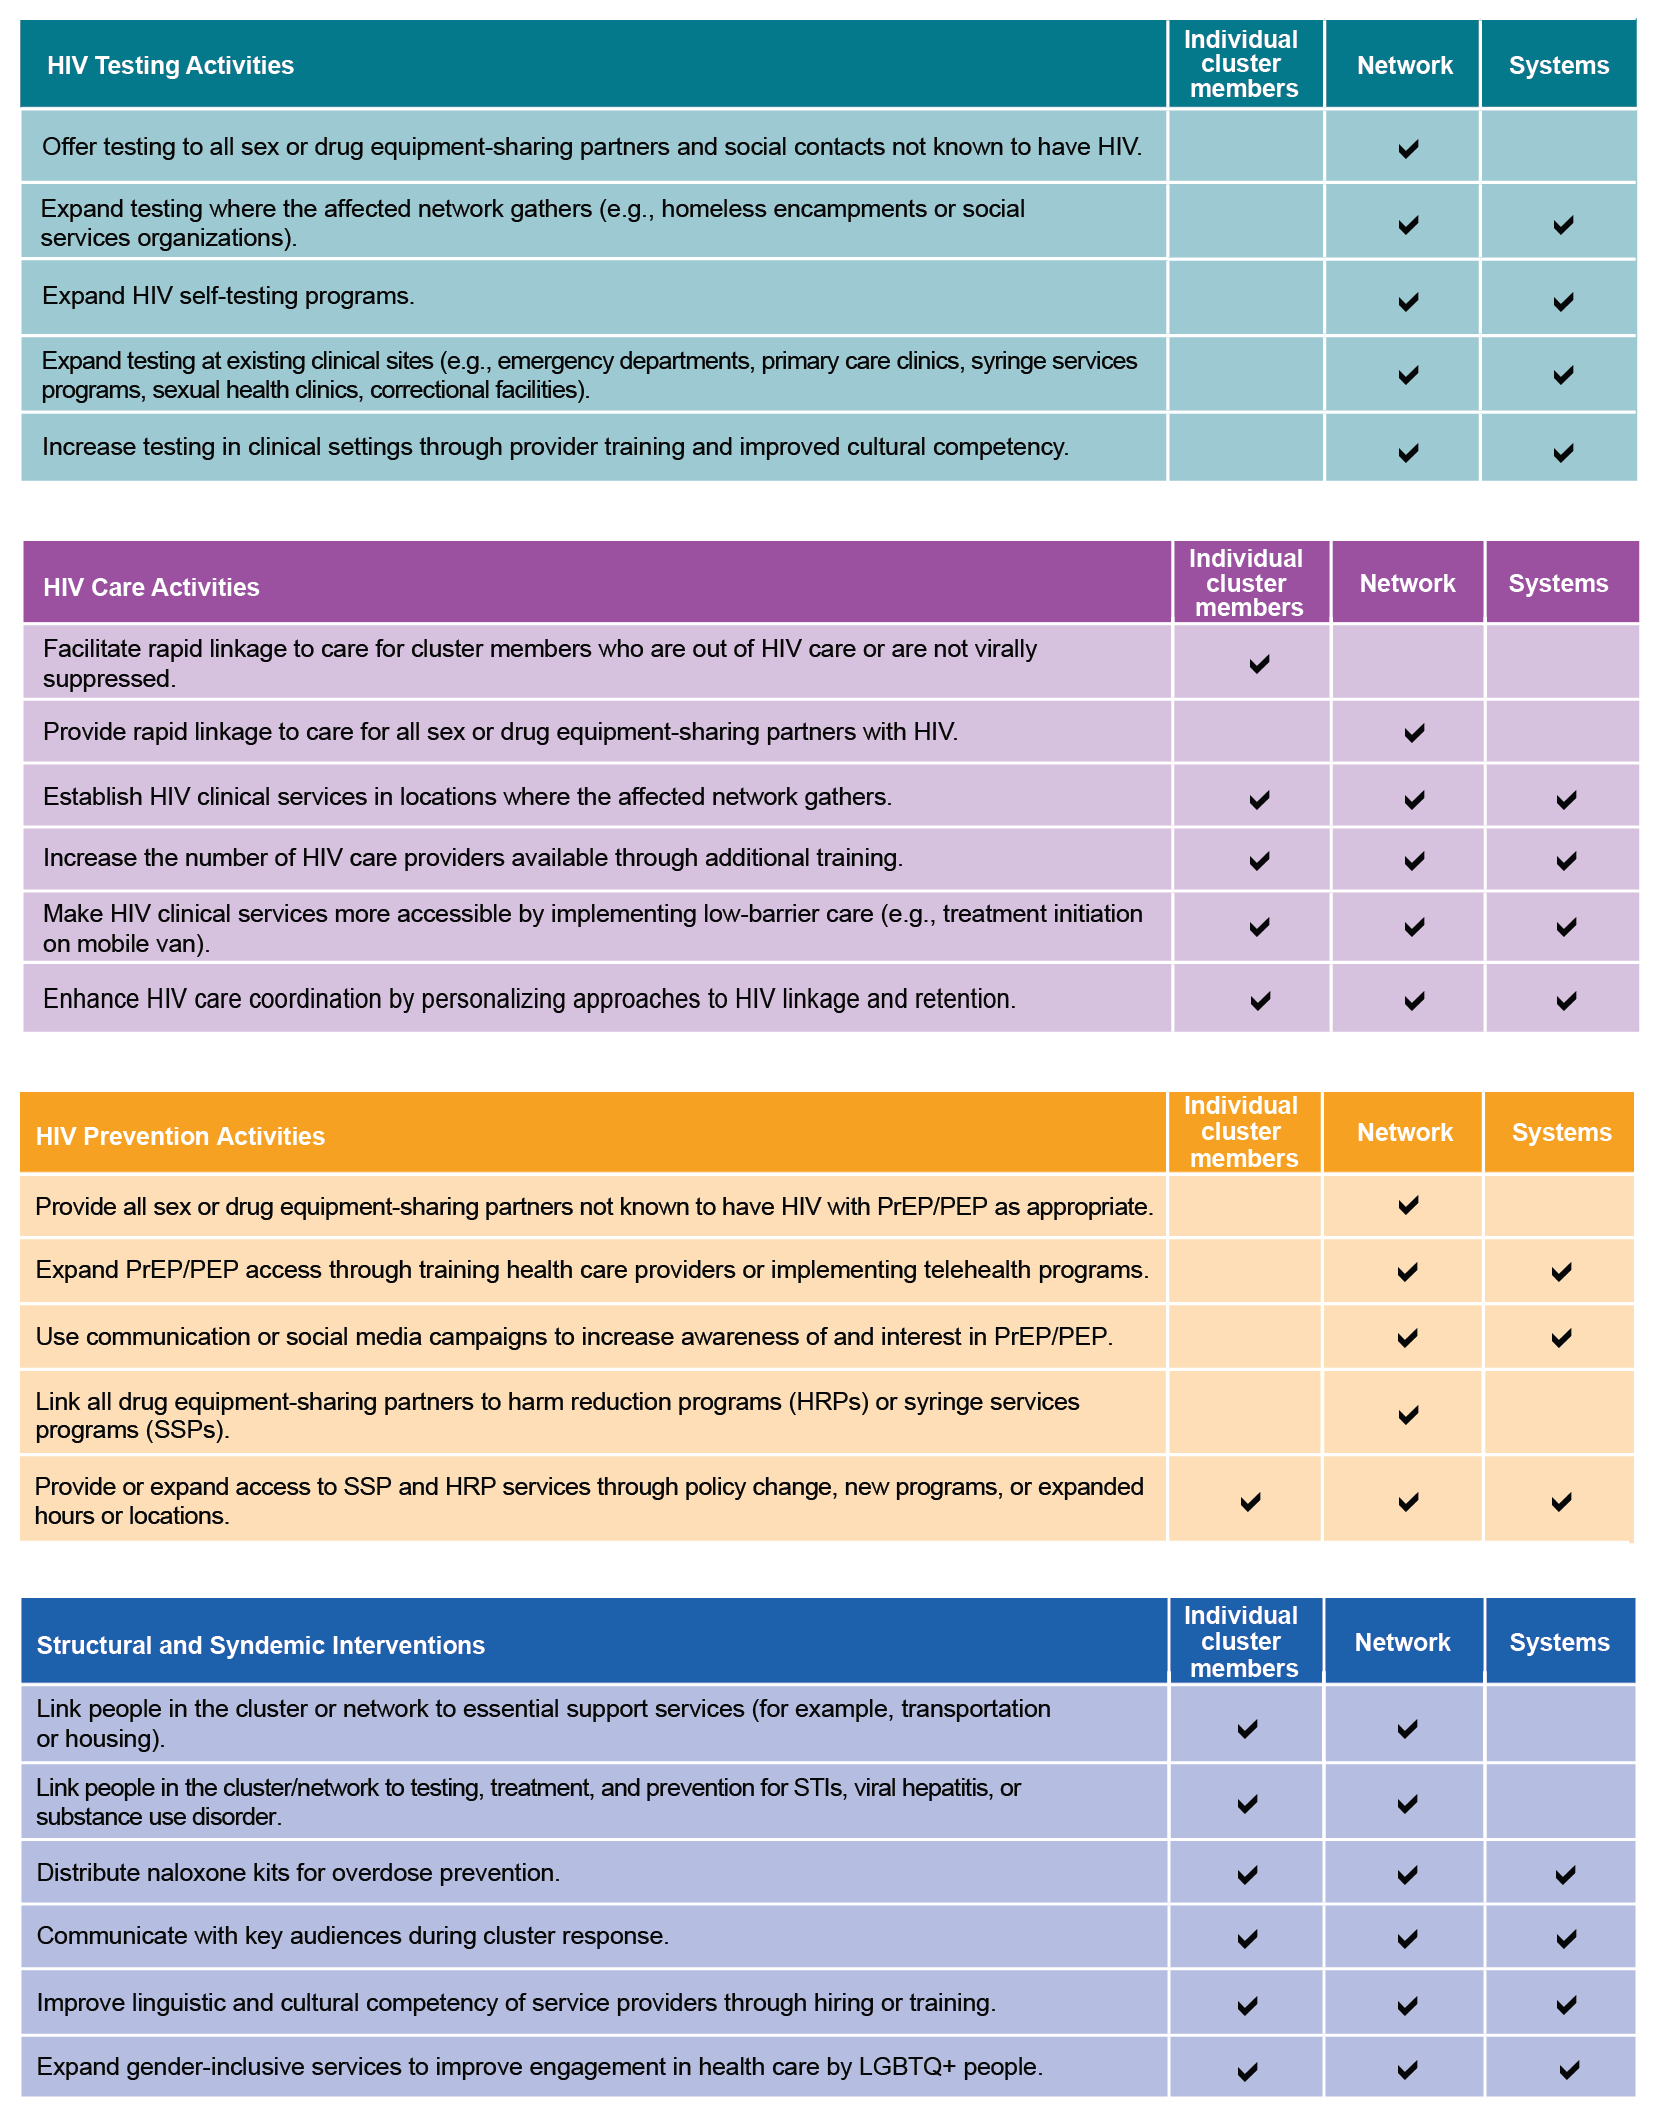 Table describing examples of HIV testing activities and checkmarks indicating level of impac